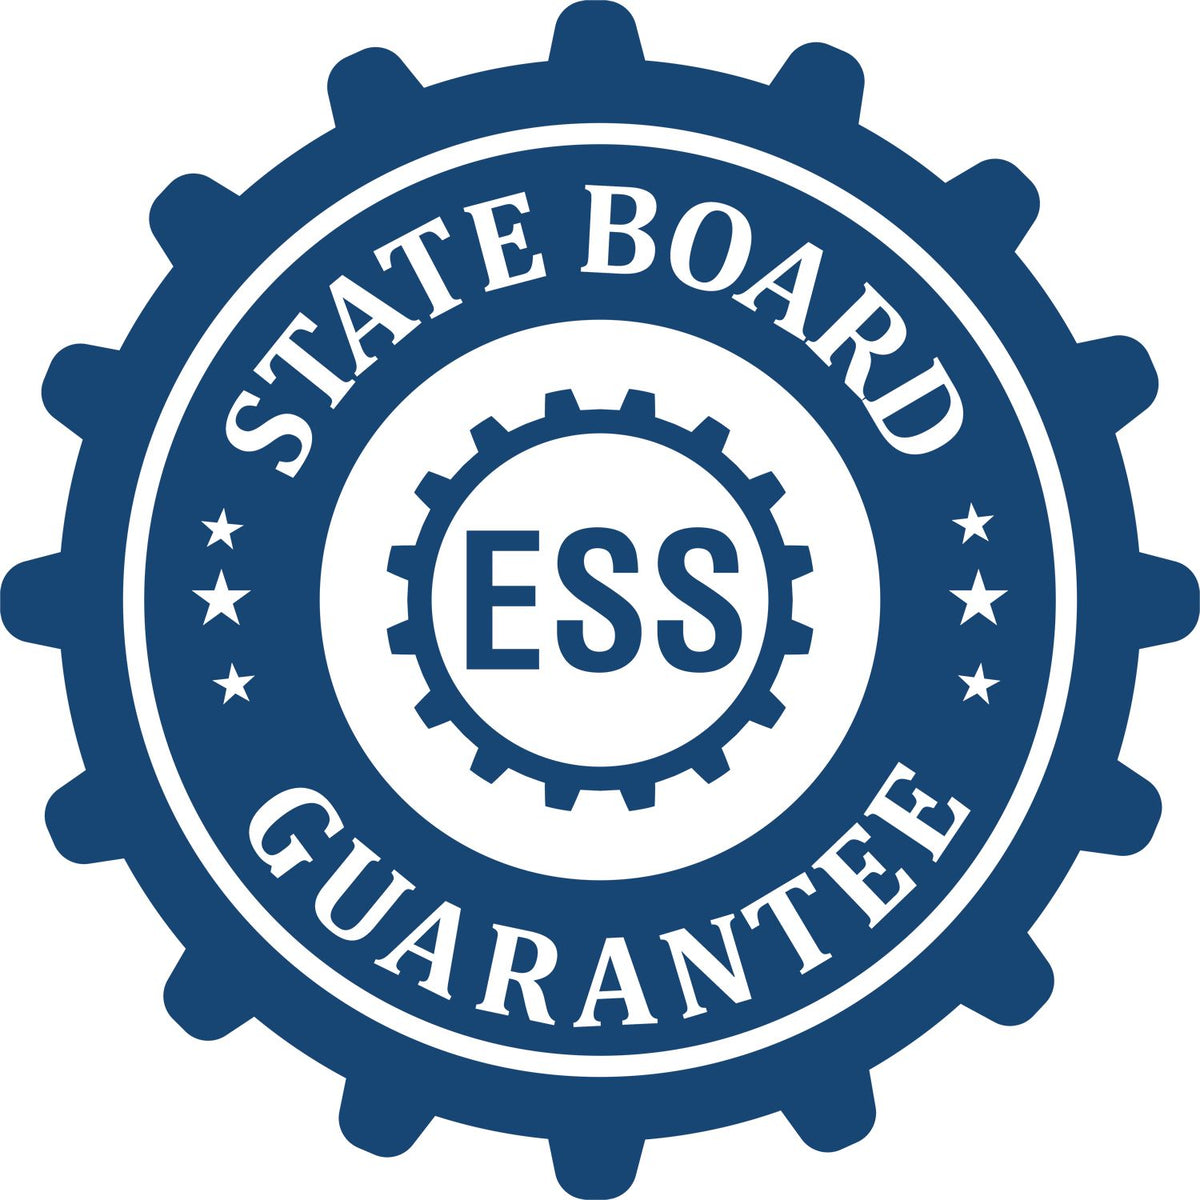 An emblem in a gear shape illustrating a state board guarantee for the Indiana Engineer Desk Seal product.